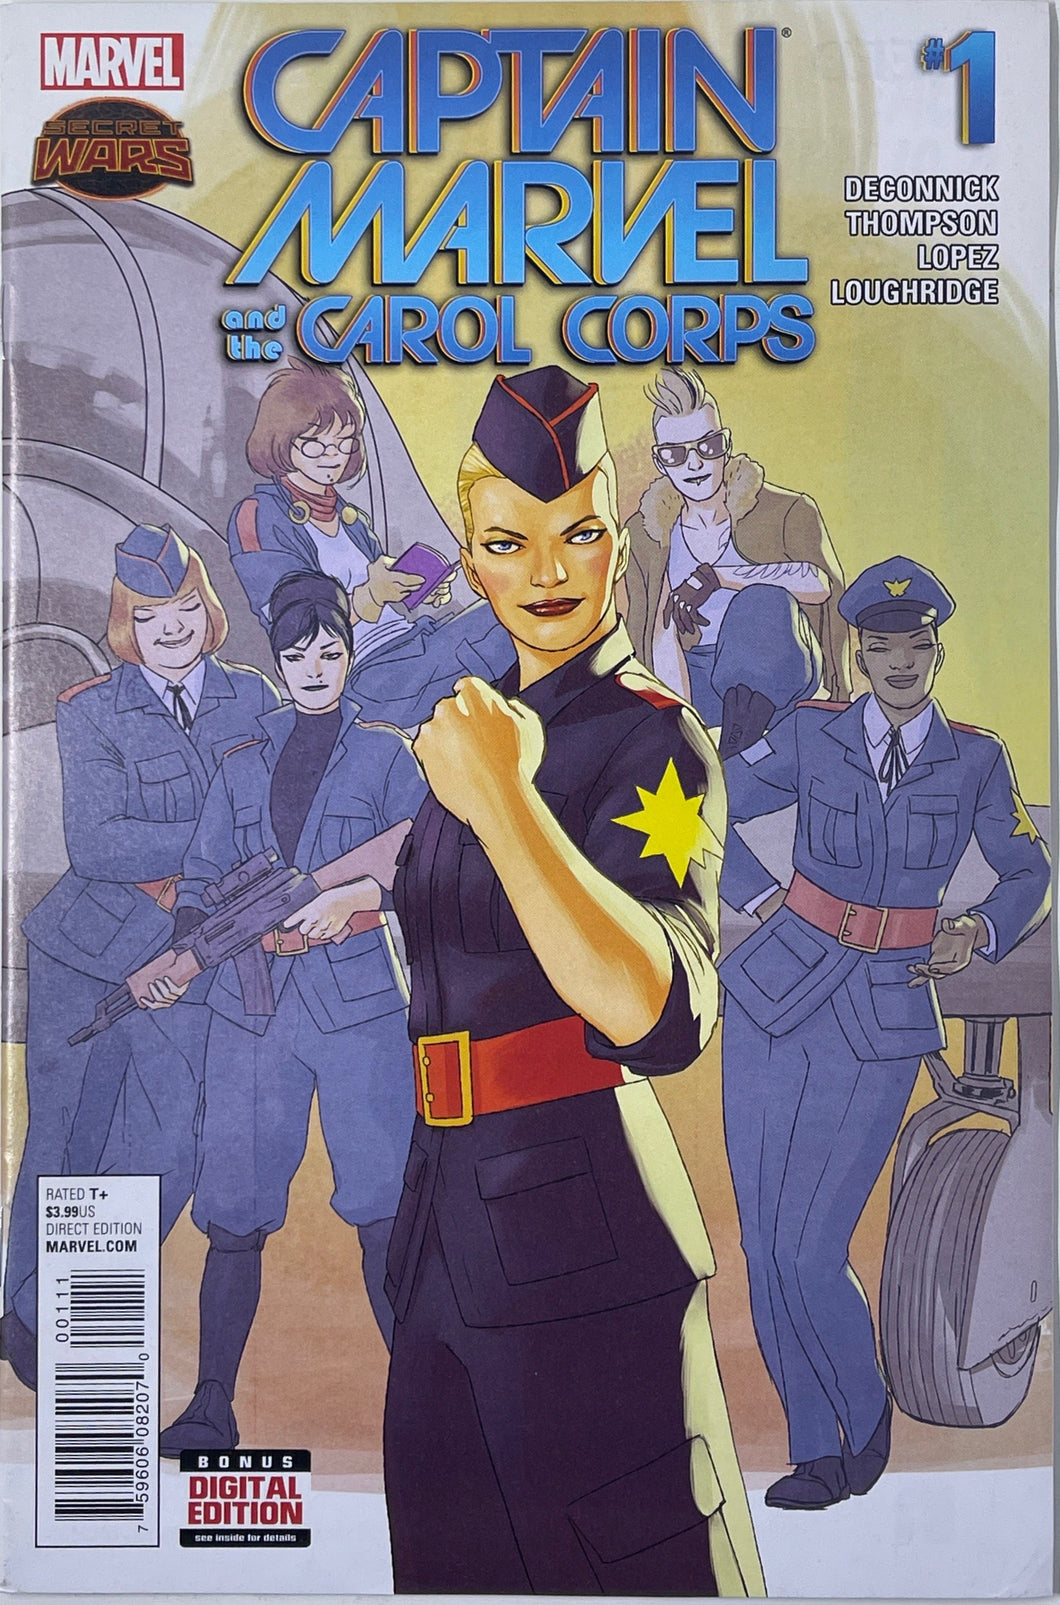 Captain Marvel and the Carol Corps 1